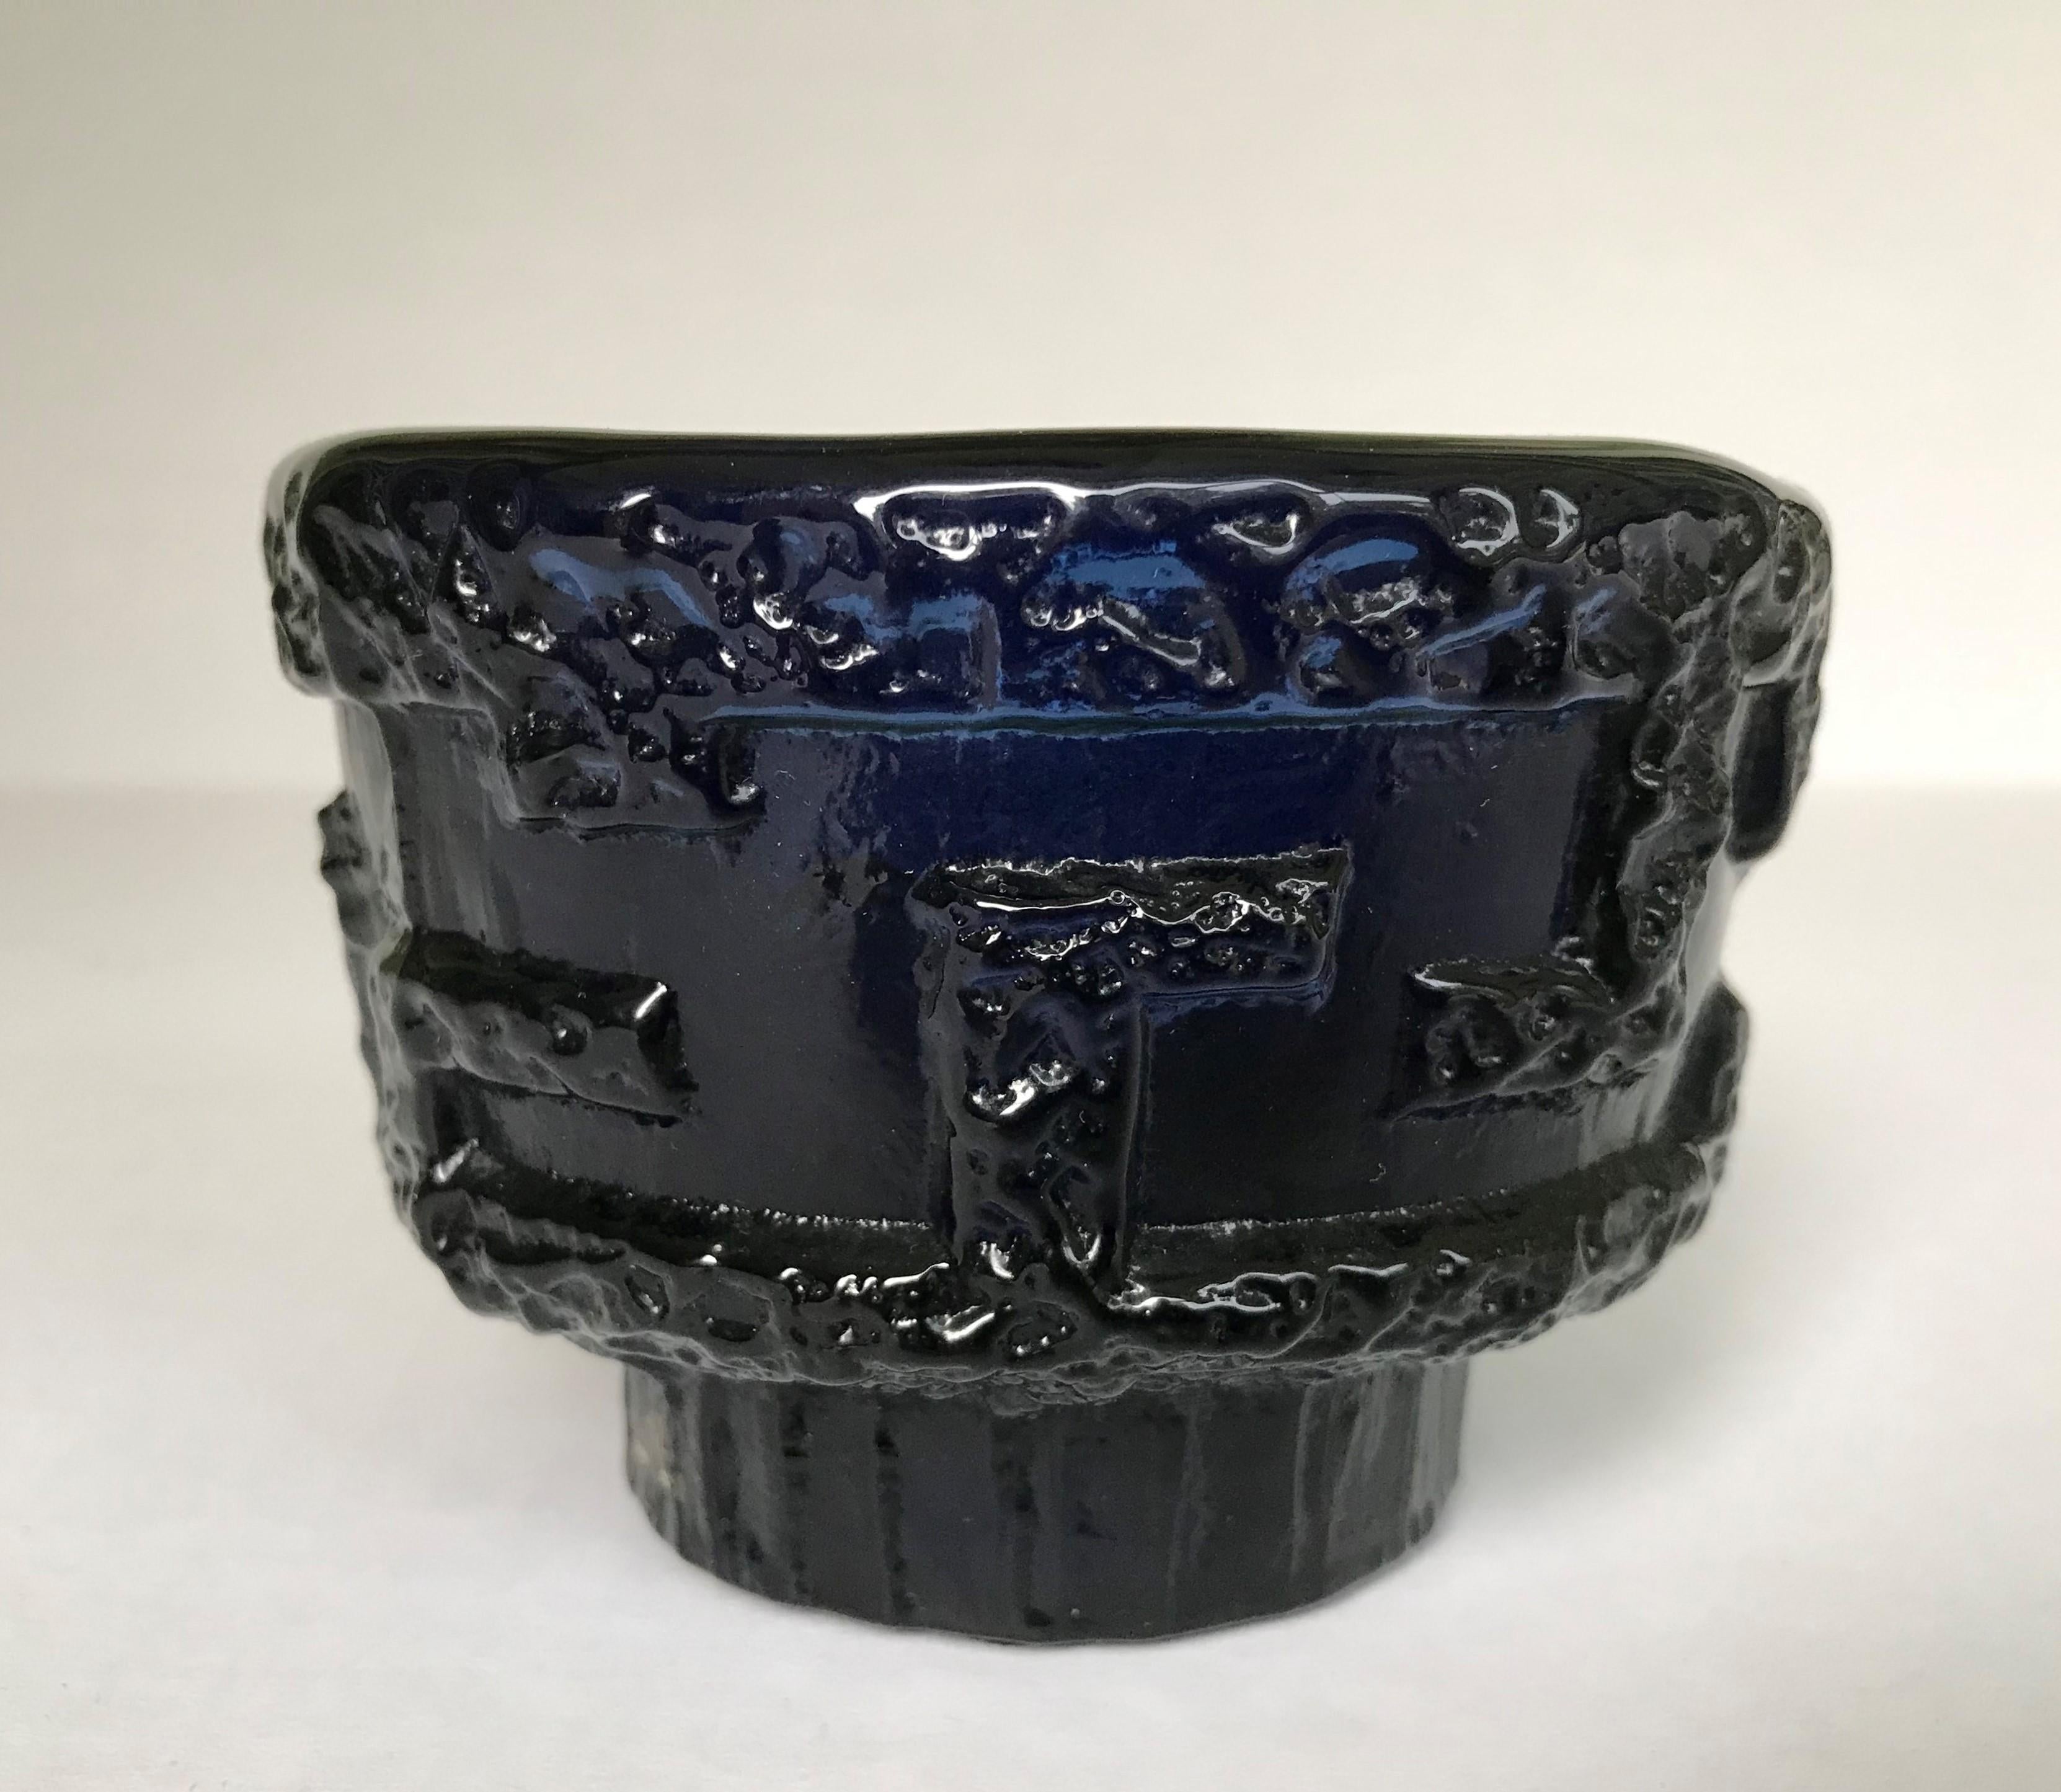 The Ruda Glasbruk company was founded in 1910 in Ruda, a town in the glass making area of Sweden, and closed in 1972. High levels of cobalt was used to give the glass its deep midnight blue color. The shape was given when poured into molds made from